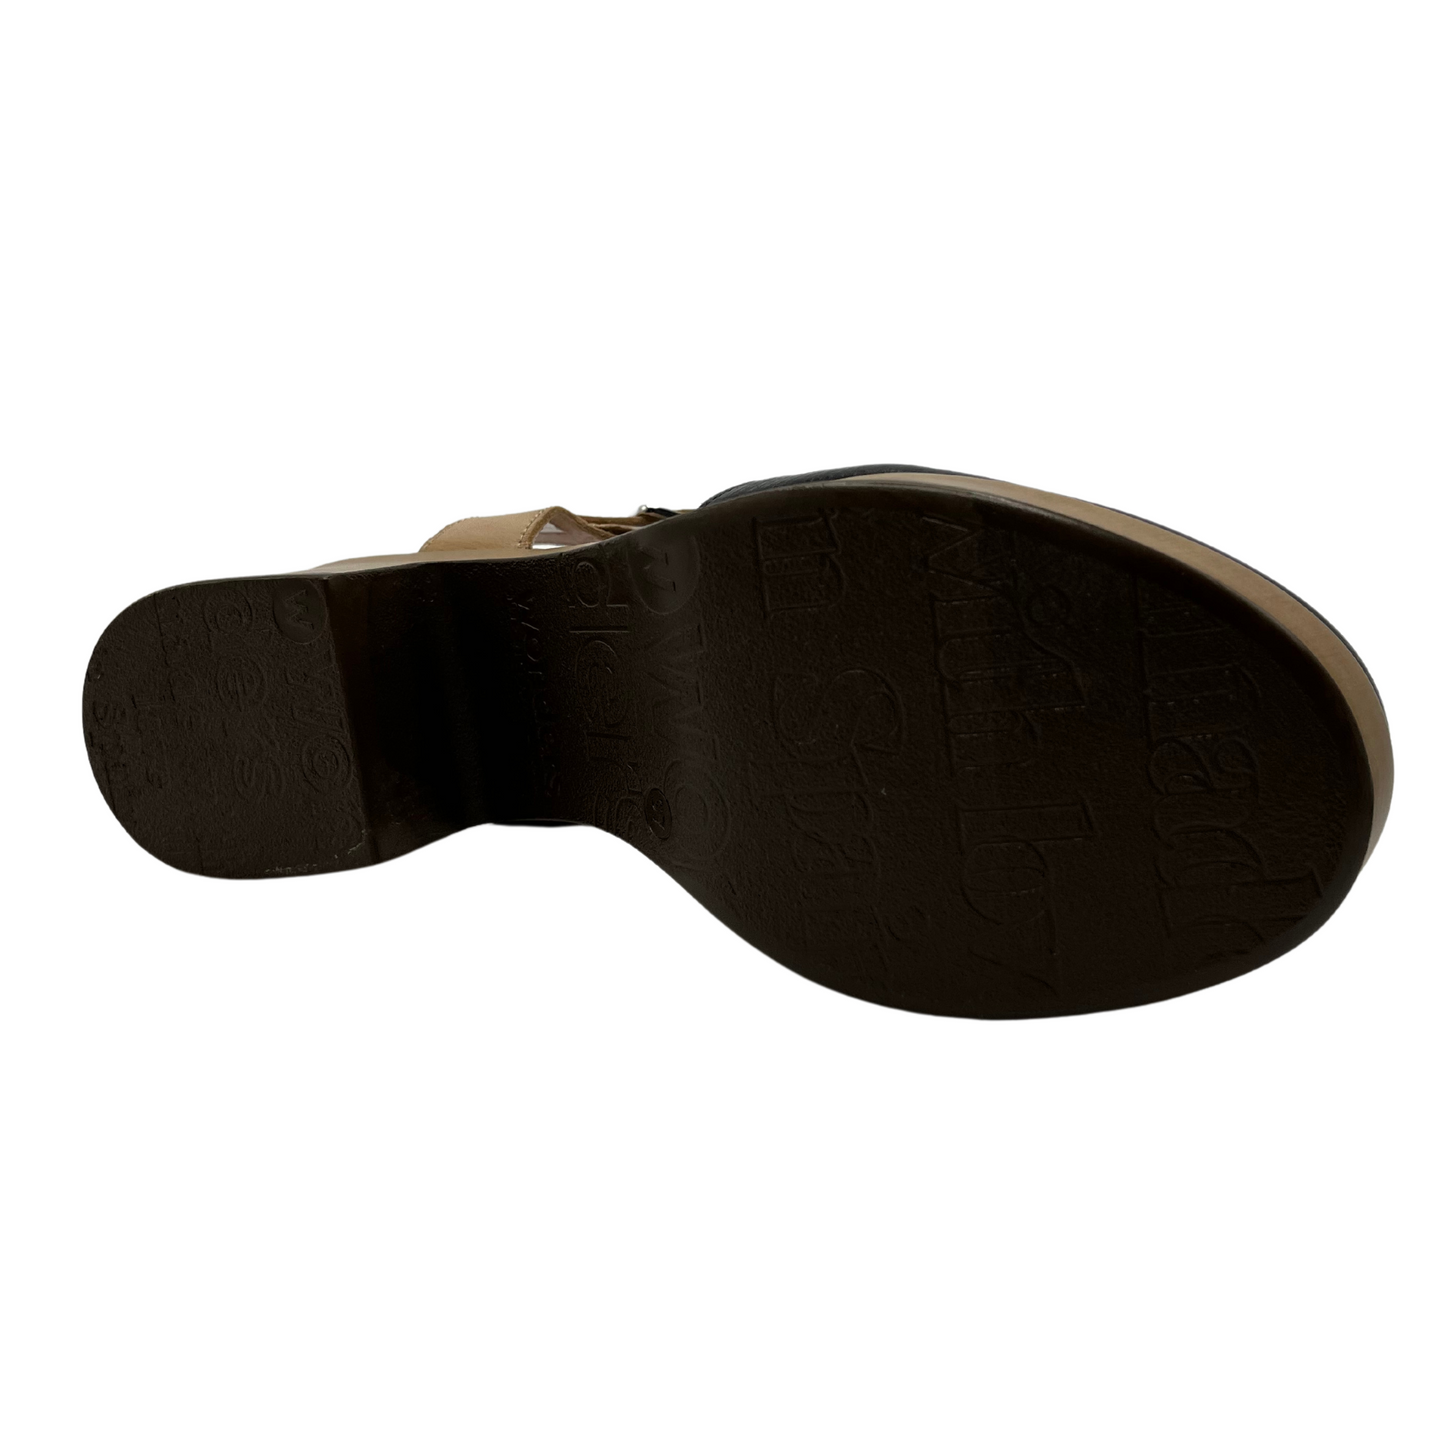 Bottom view of black and tan clog with chunky sole and rounded toe